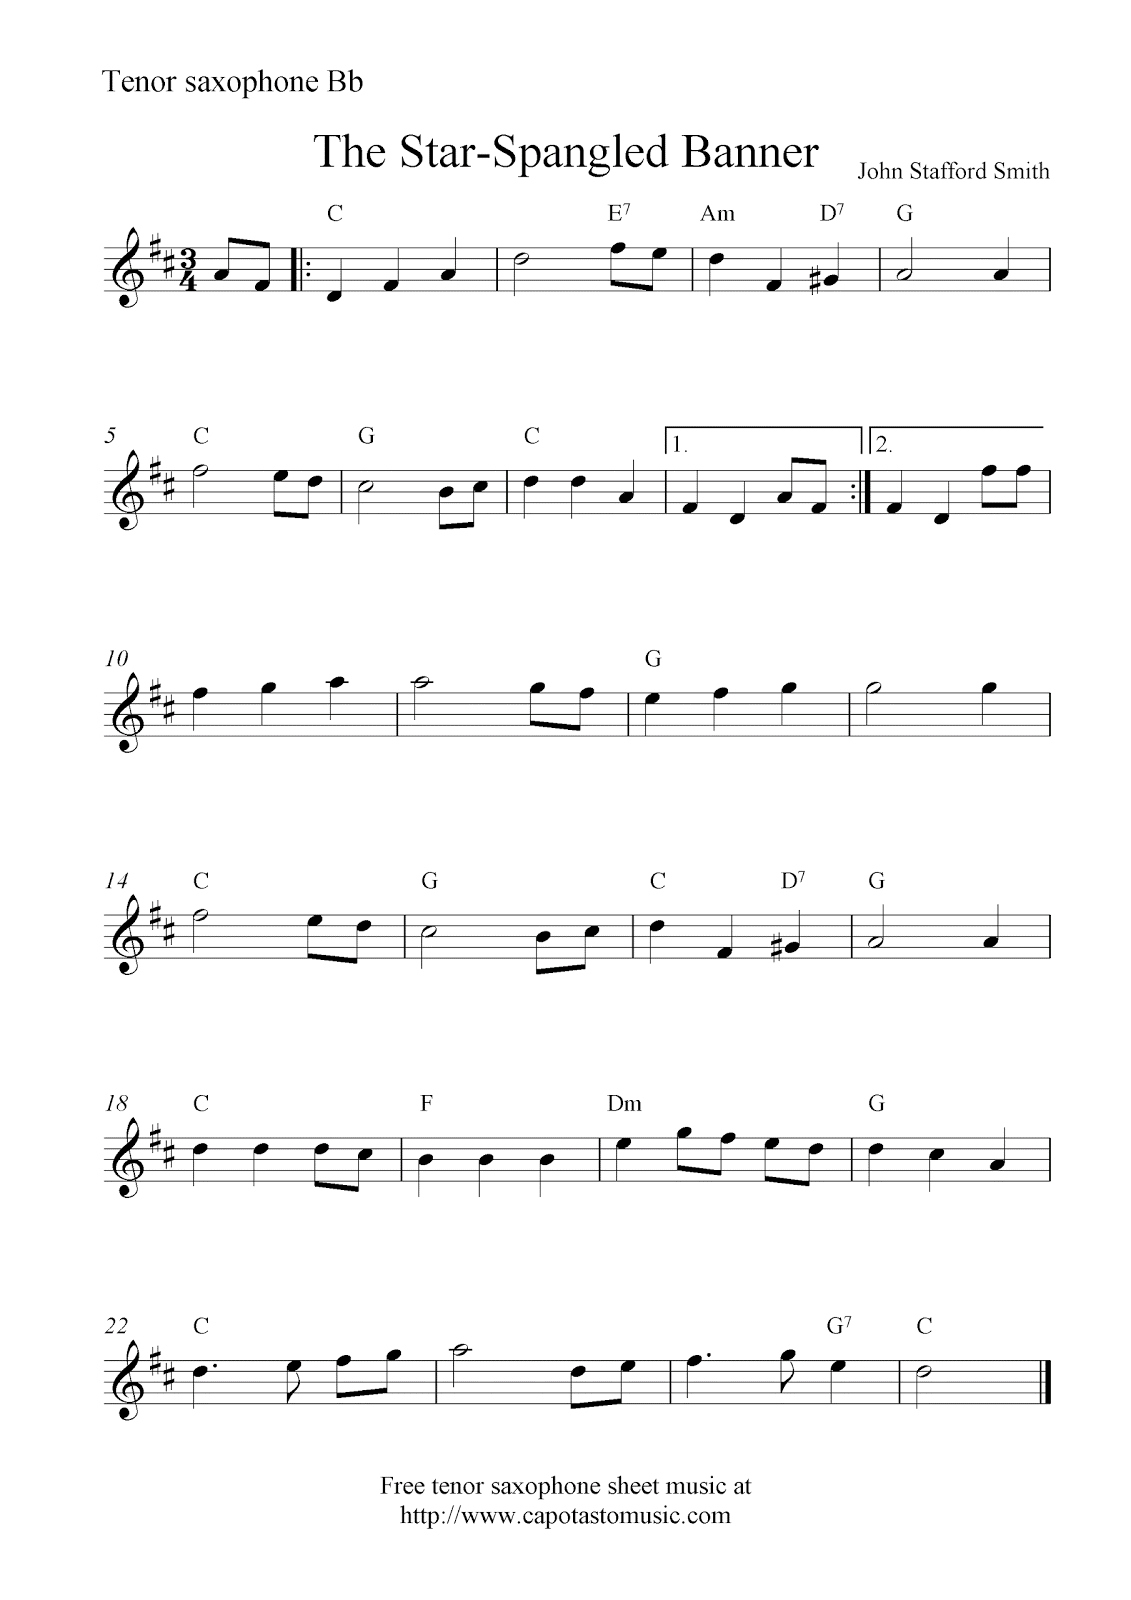 Free Tenor Saxophone Sheet Music, The Star-Spangled Banner - Free Printable Piano Sheet Music For The Star Spangled Banner